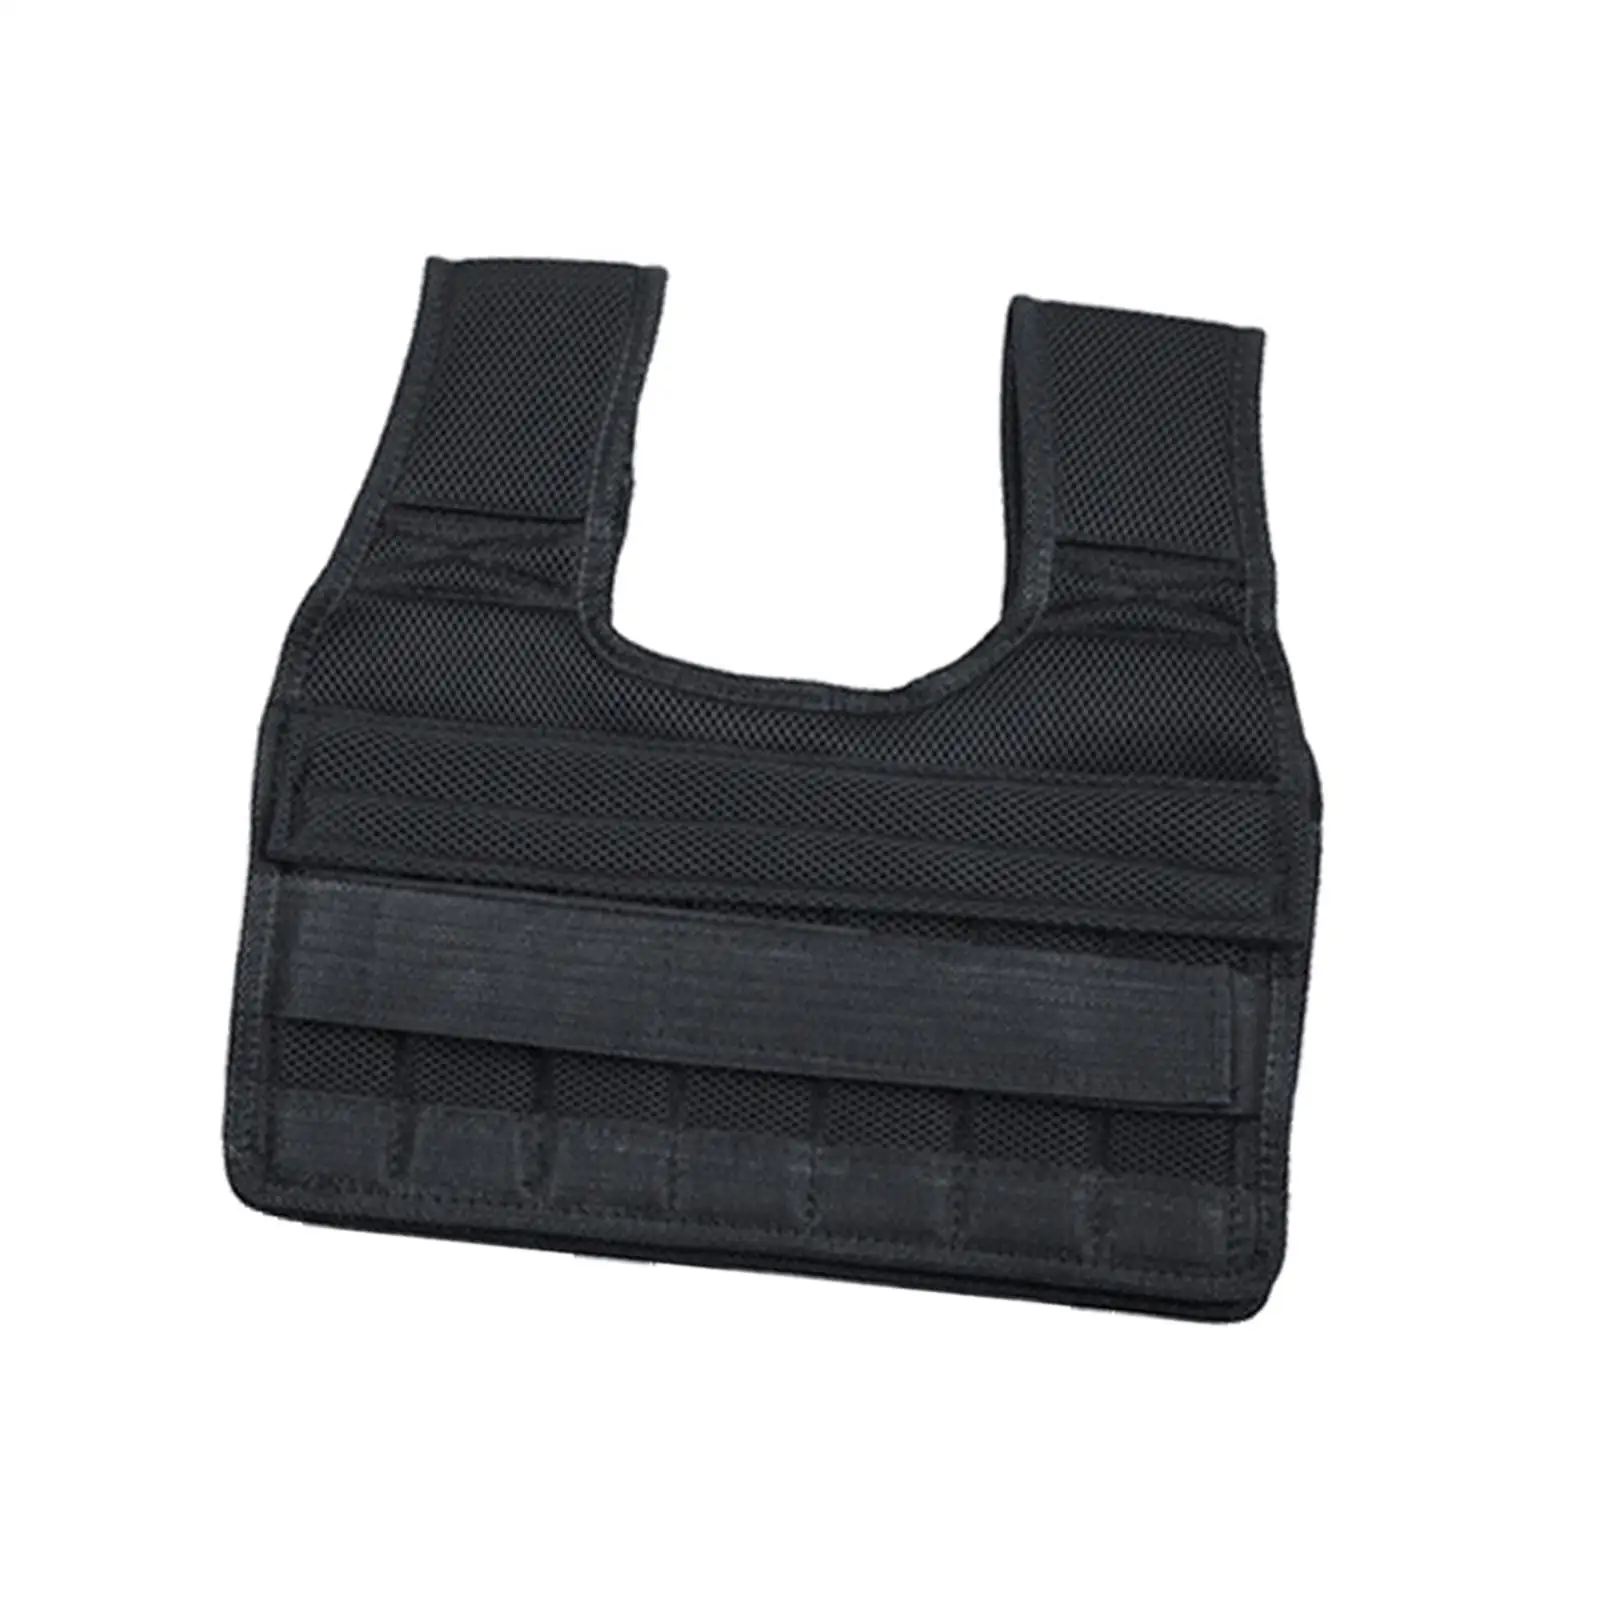 Vest Adjustable Heavy Duty Exercise Fitness Gym Weightloading Body Weight Vest